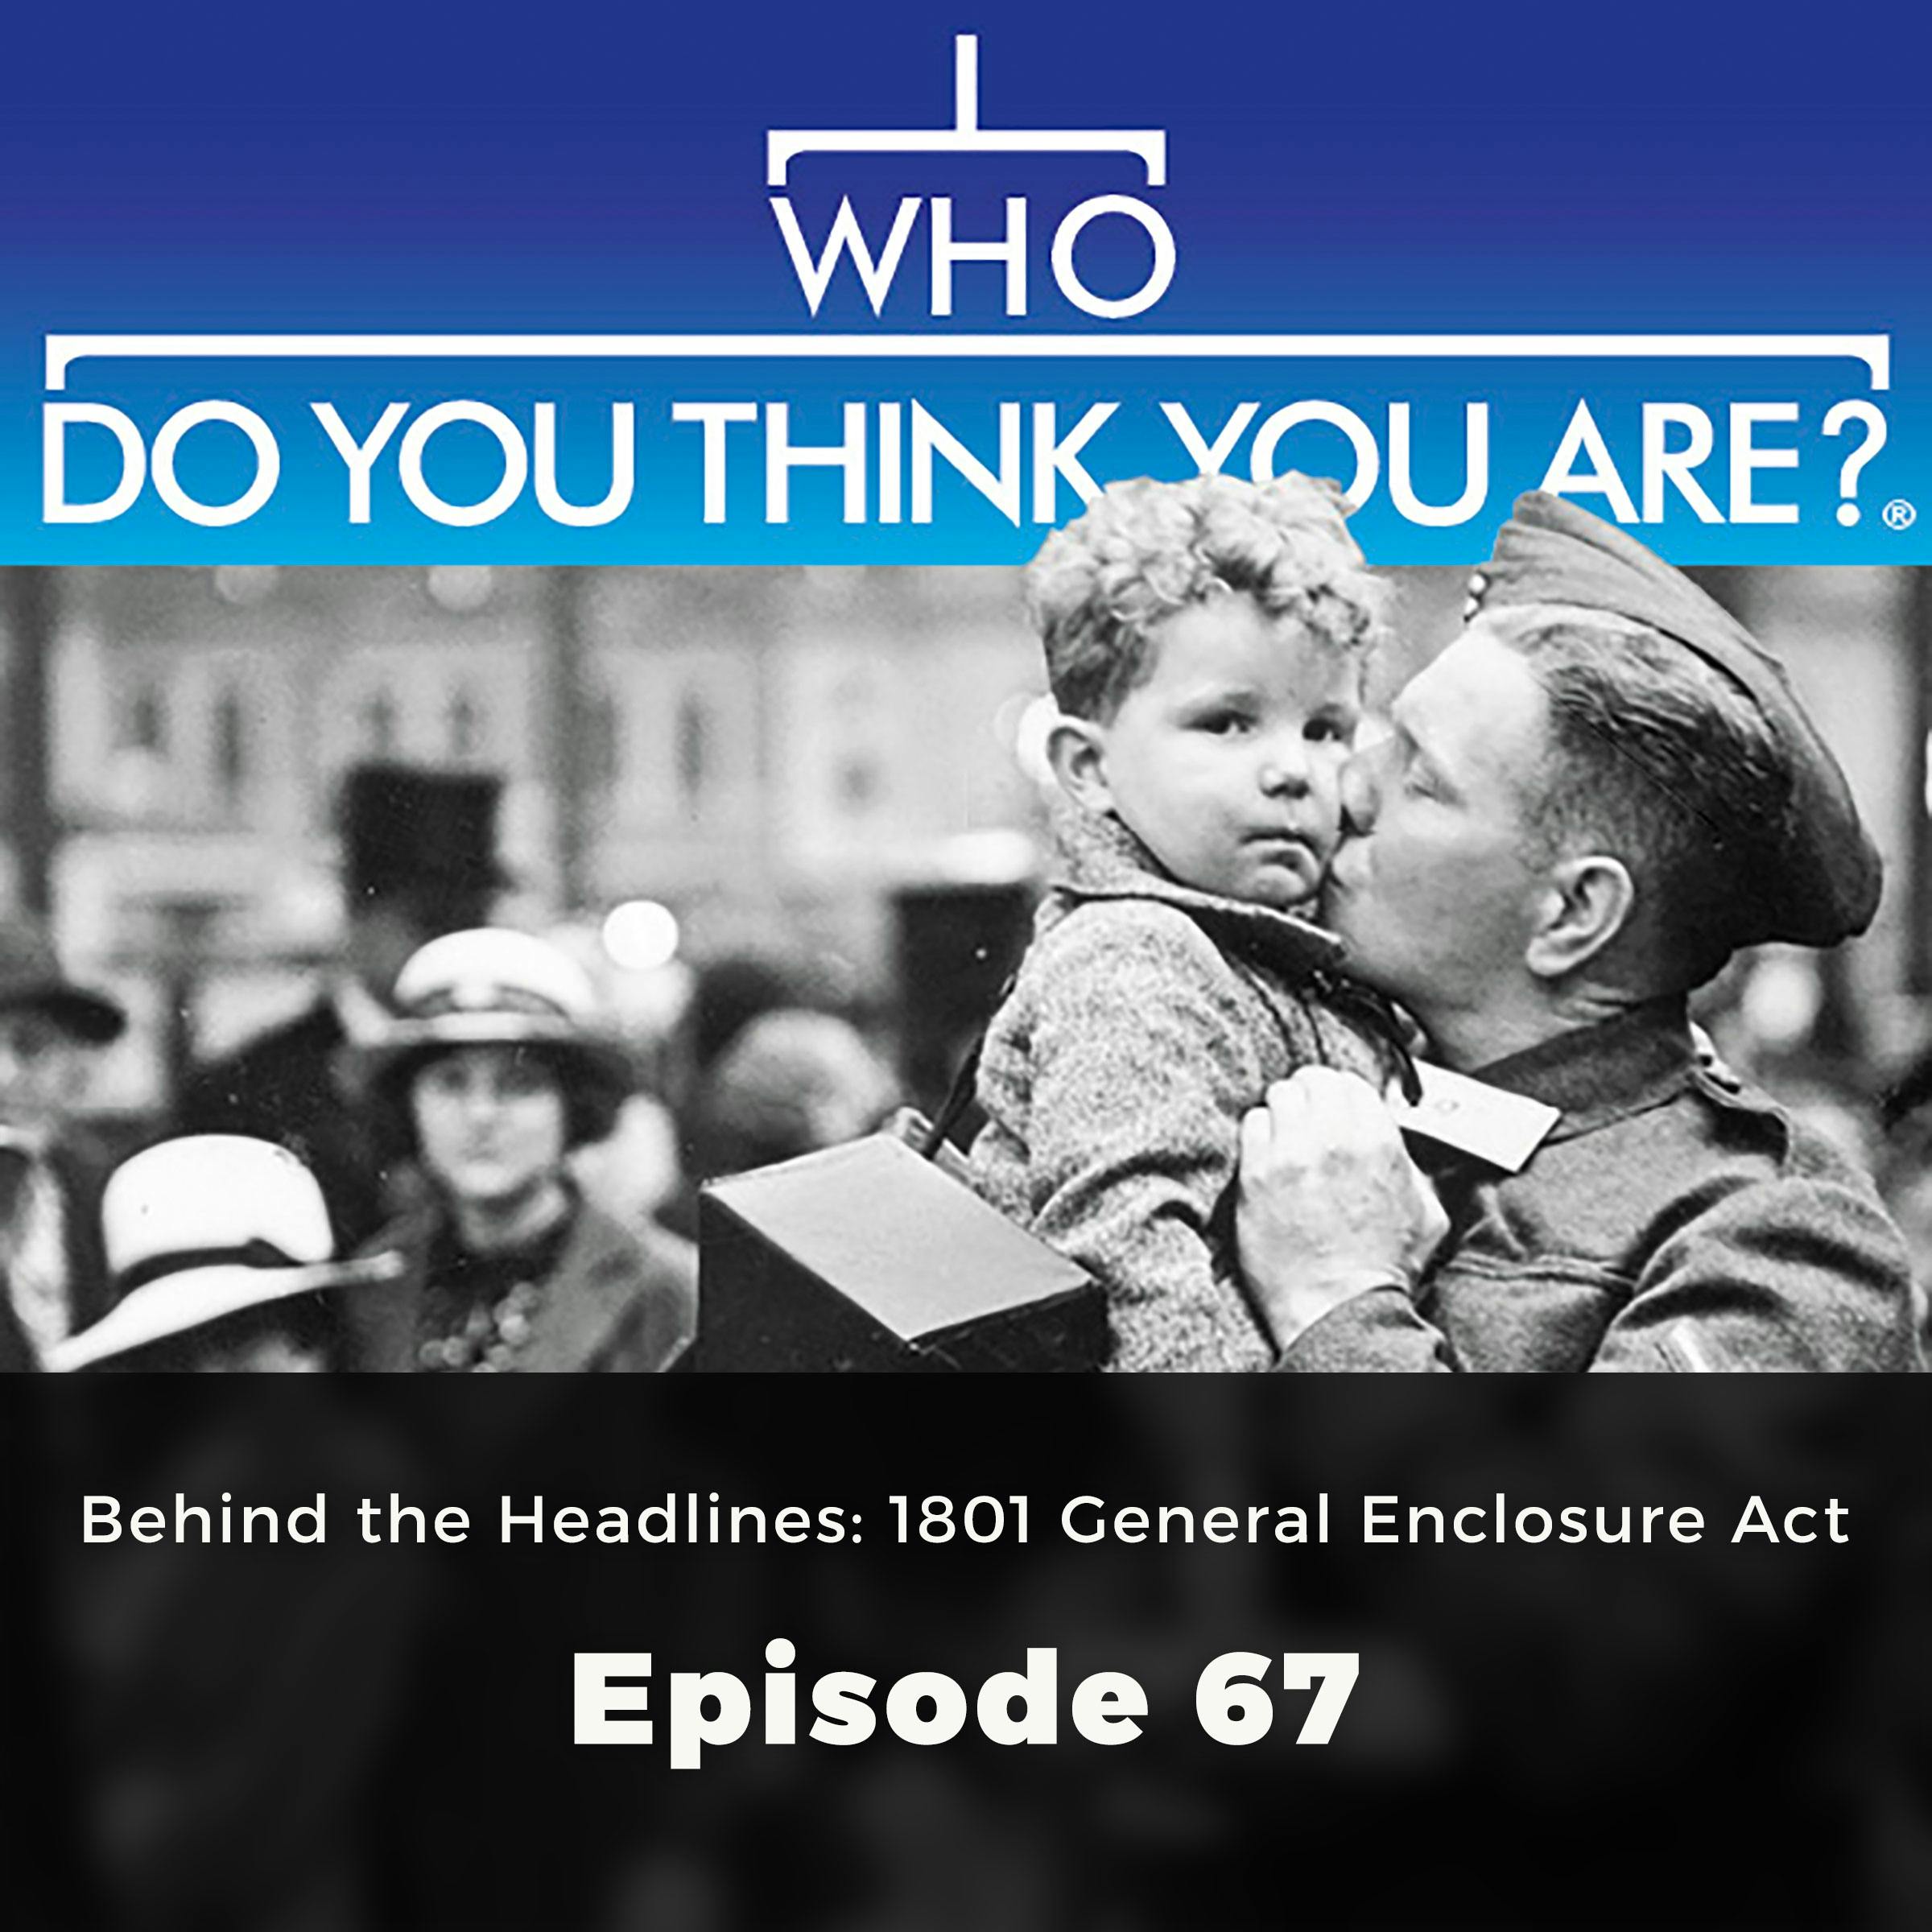 Who Do You Think You Are? Behind the Headlines: 1801 General Enclosure Act: Episode 67 - undefined